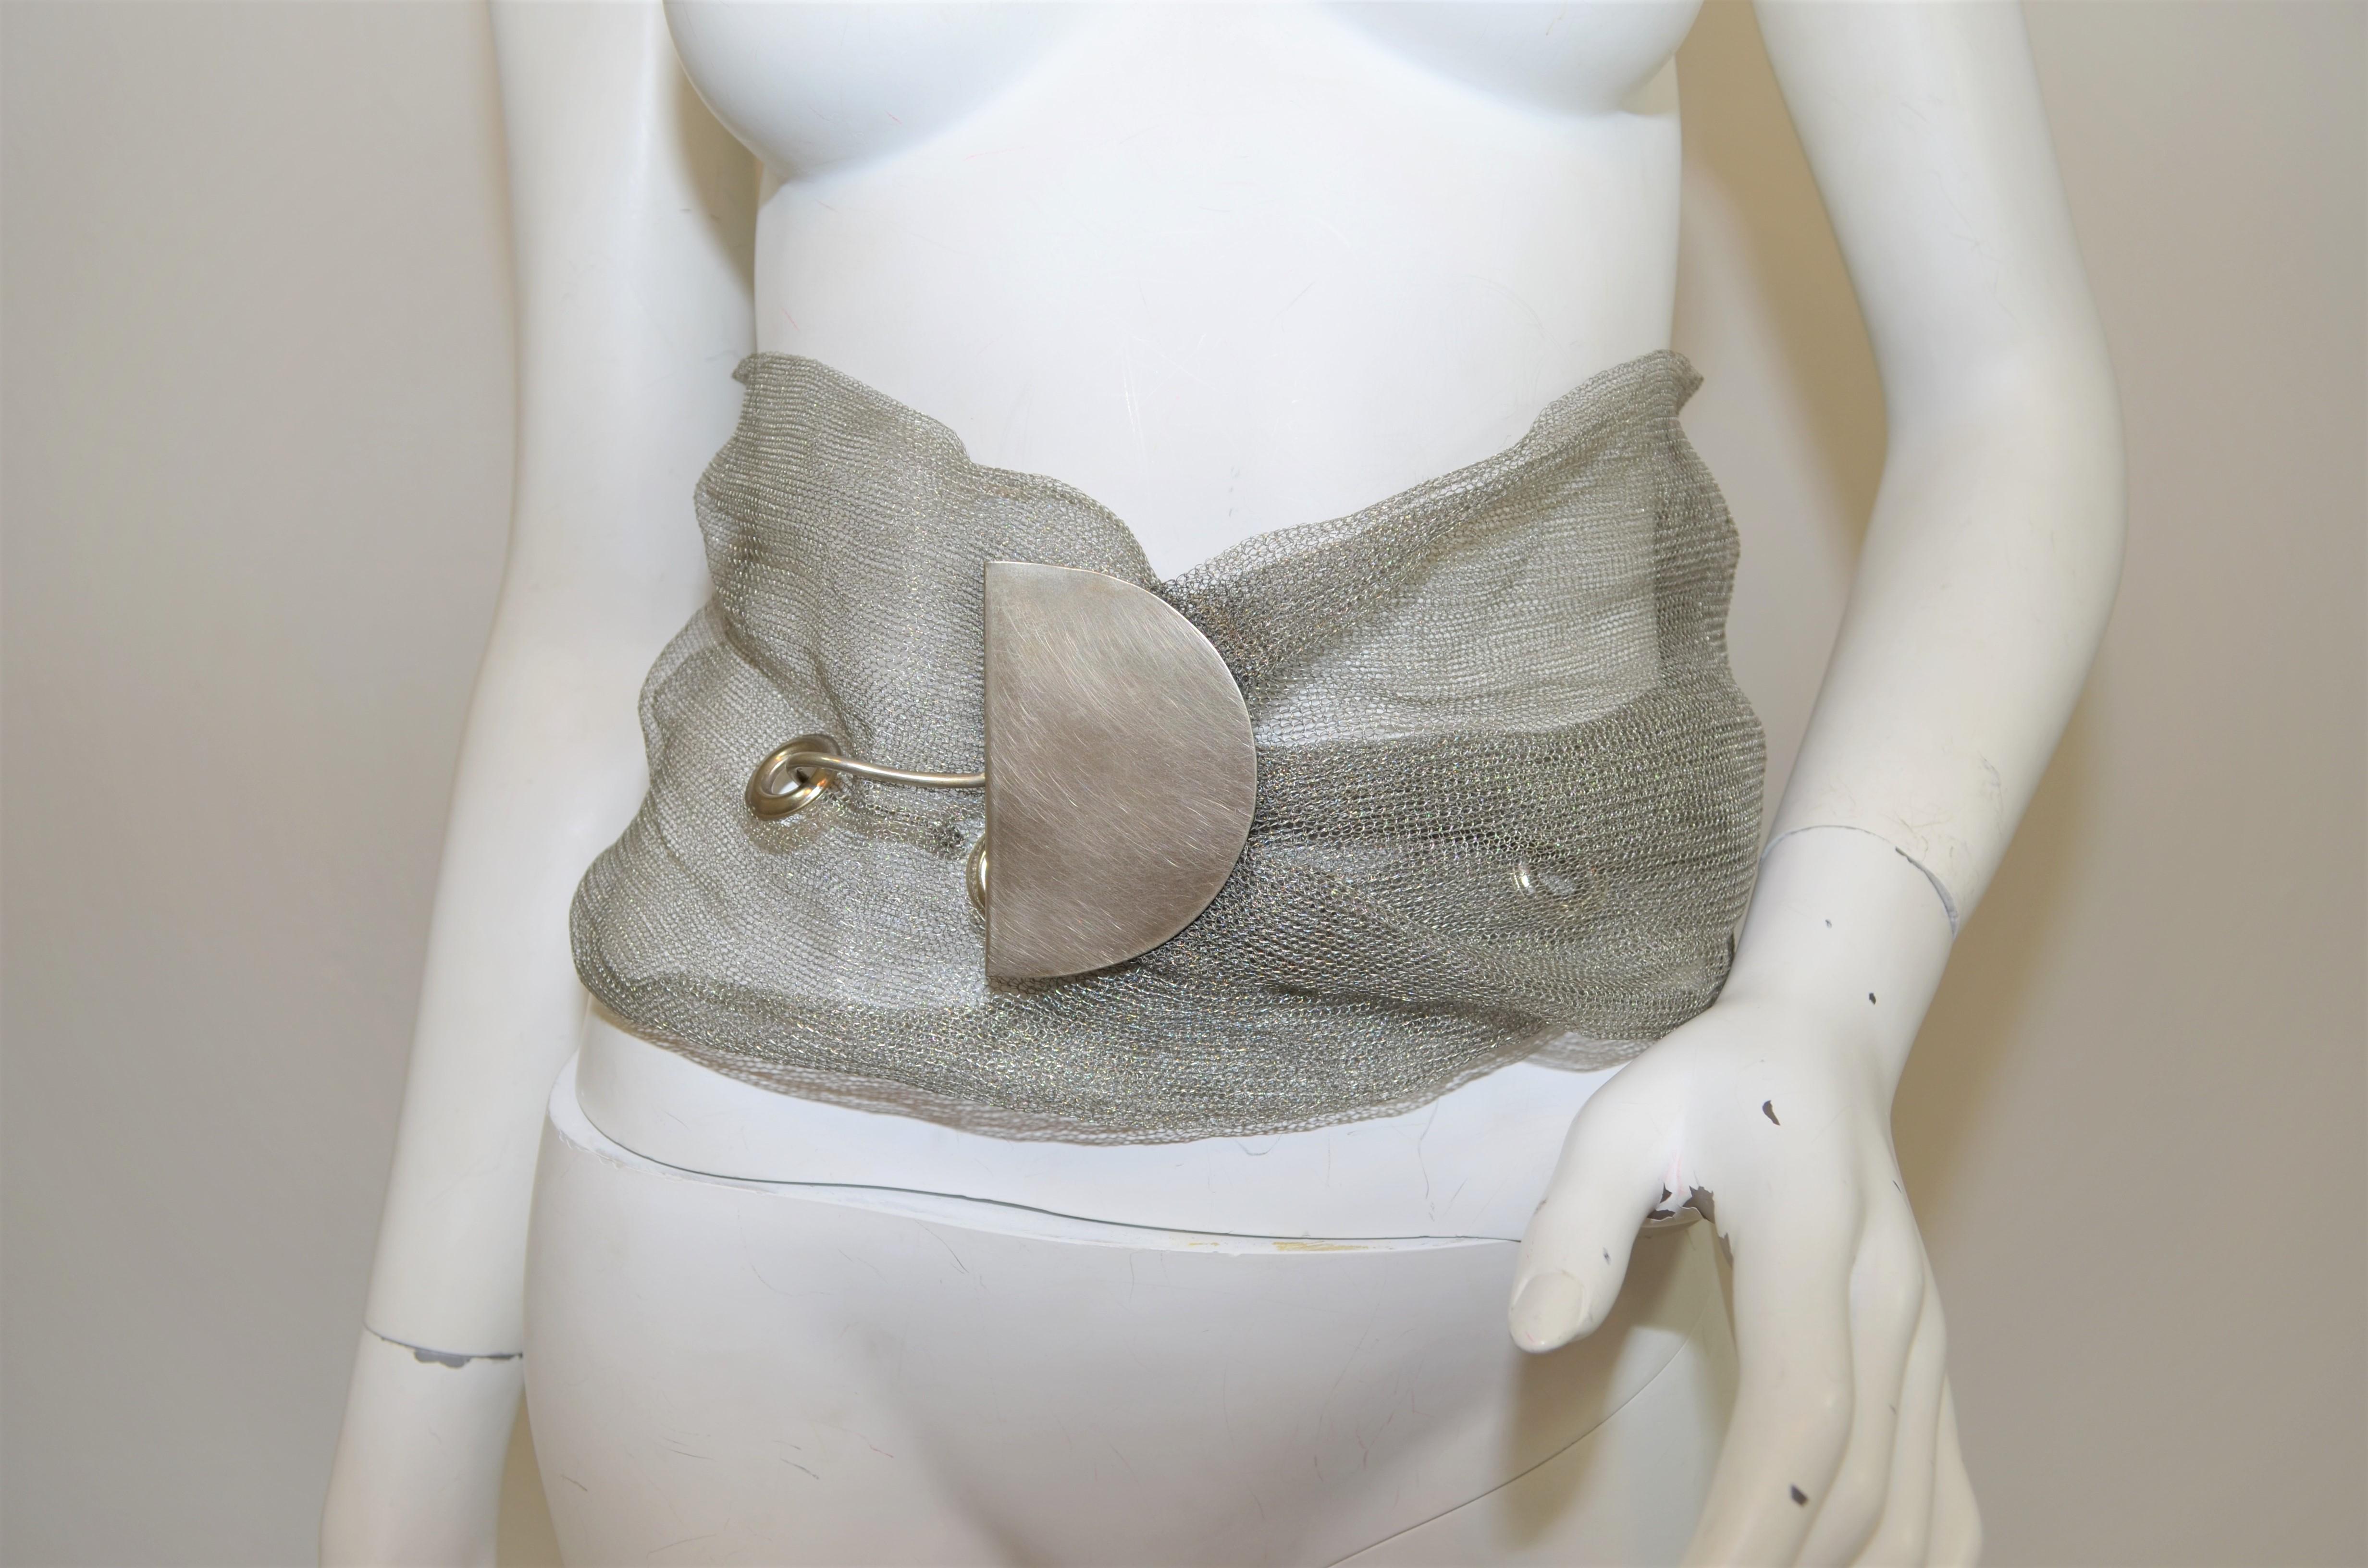 Sarah Cavender belt is featured in a silver mesh metal with a hook fastening and measures 7.25 inches wide and 48 inches long. Belt is signed and is in great pre-owned condition.

Measurements:
Width 7.25''
Length 48''